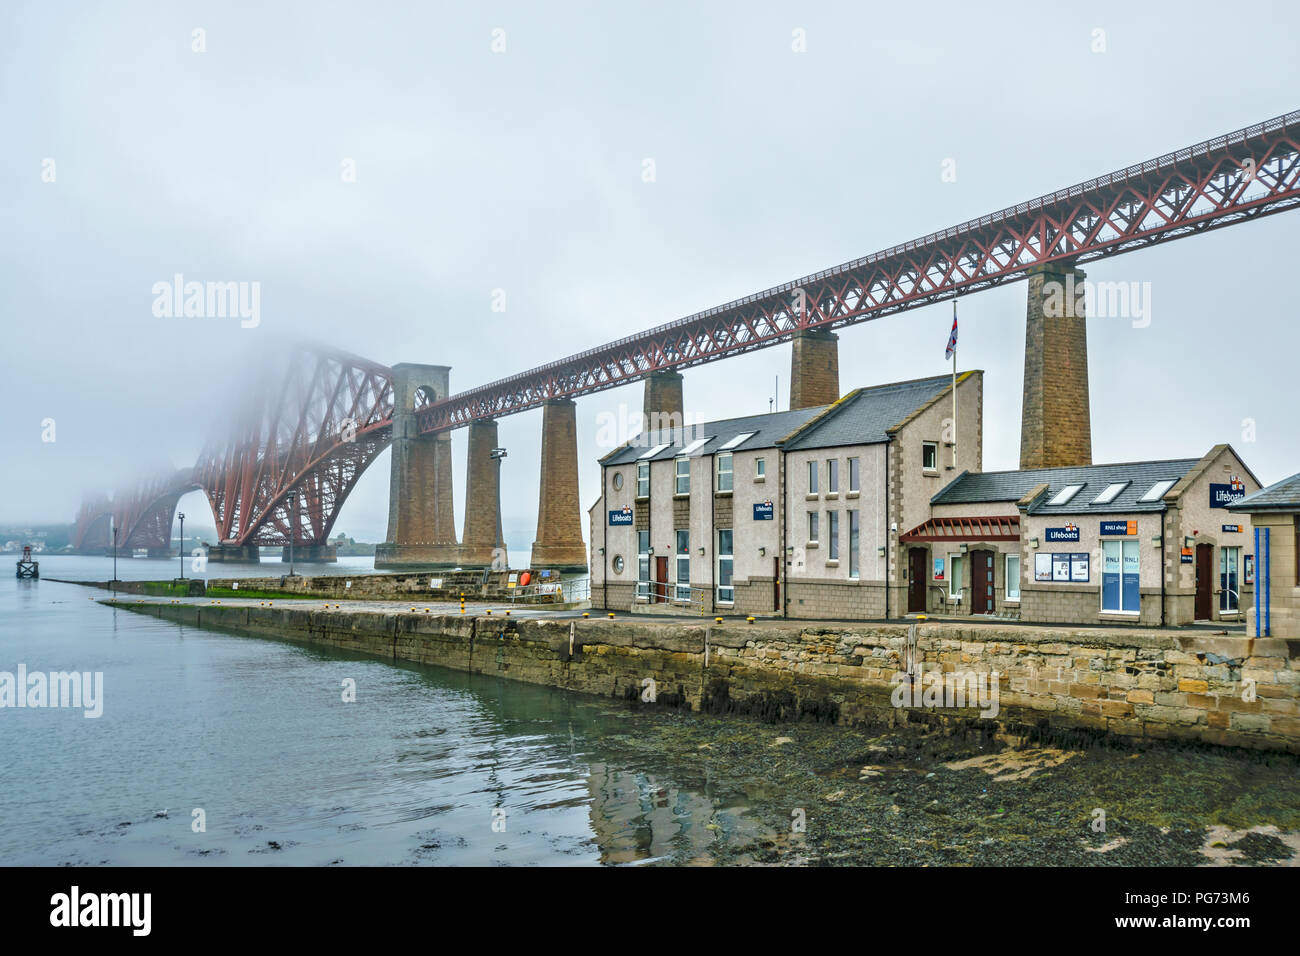 RNLI BUILDINGS SOUTH QUEENSFERRY UNDER THE FORTH RAILWAY BRIDGE SCOTLAND ON A MISTY MORNING Stock Photo